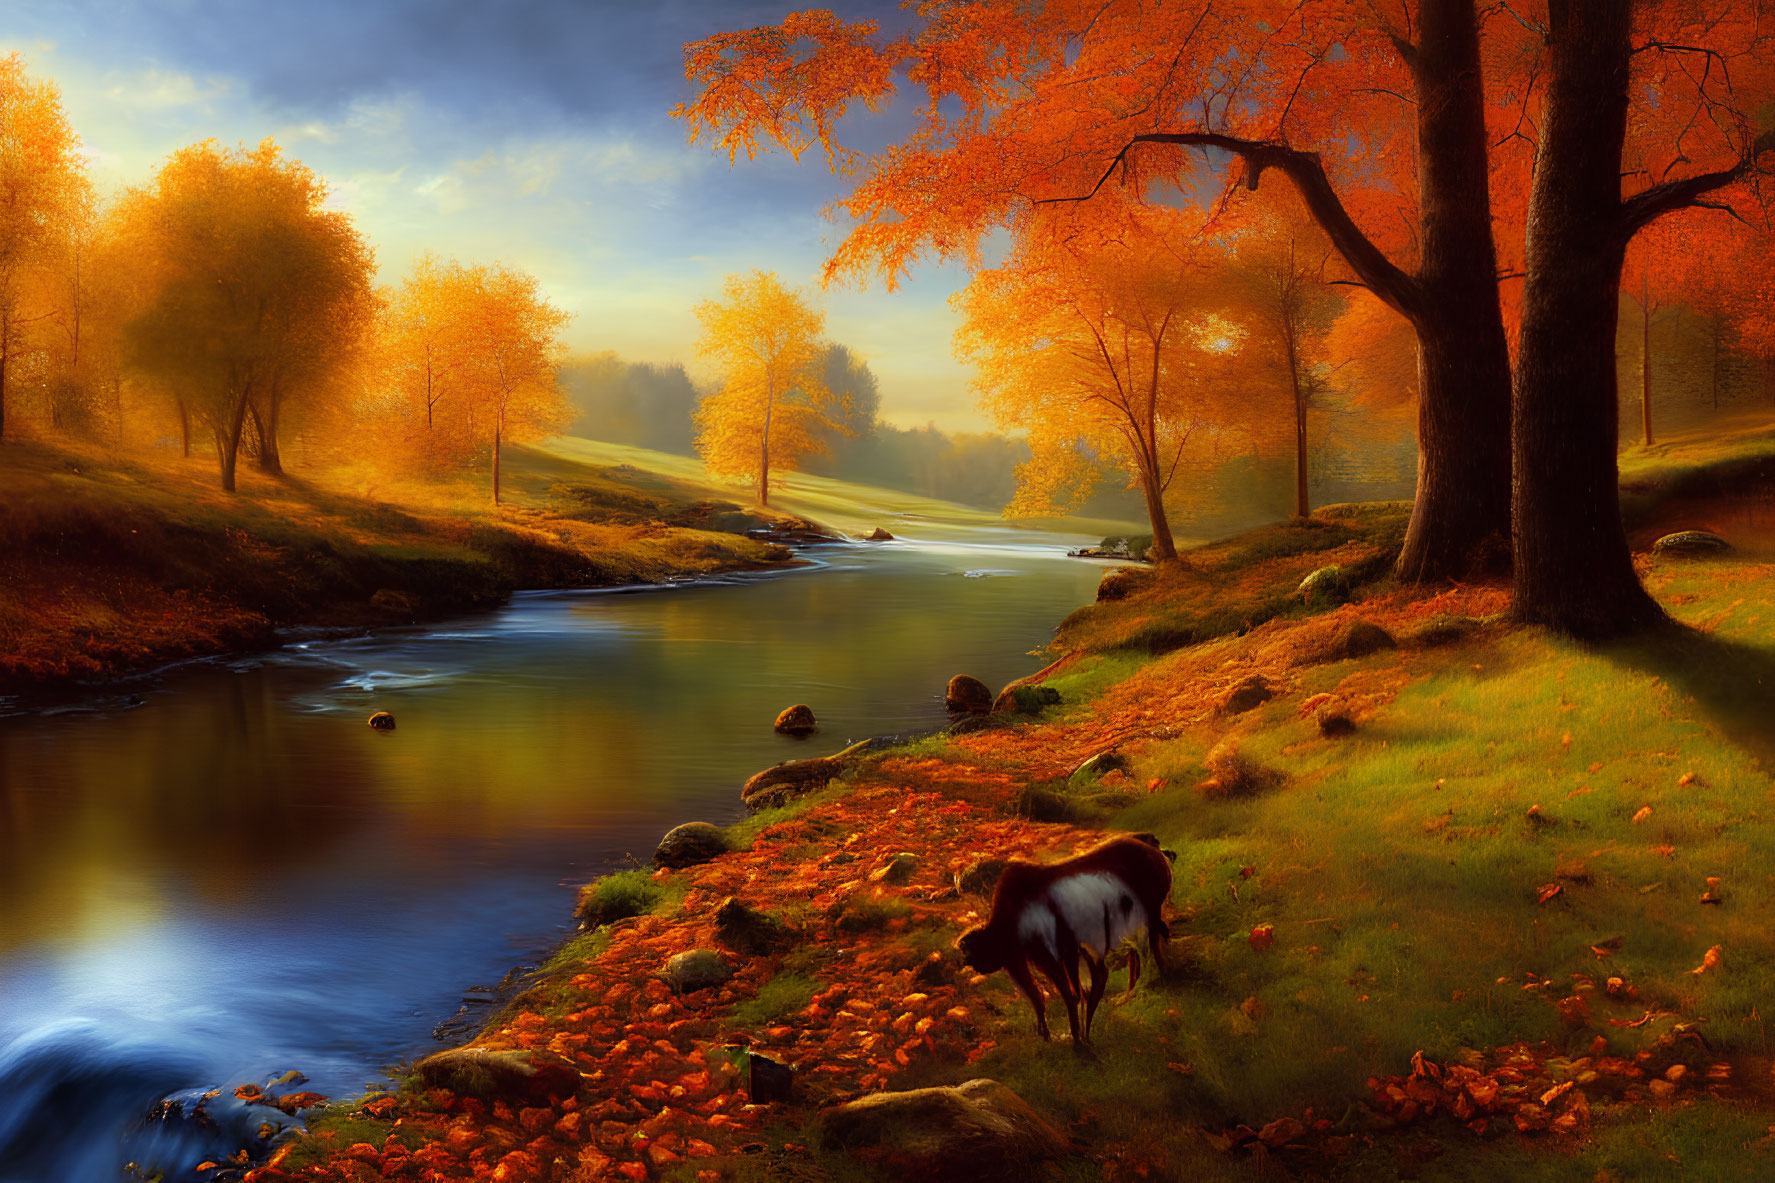 Tranquil autumn landscape with golden trees, grazing cow, and soft sunlight